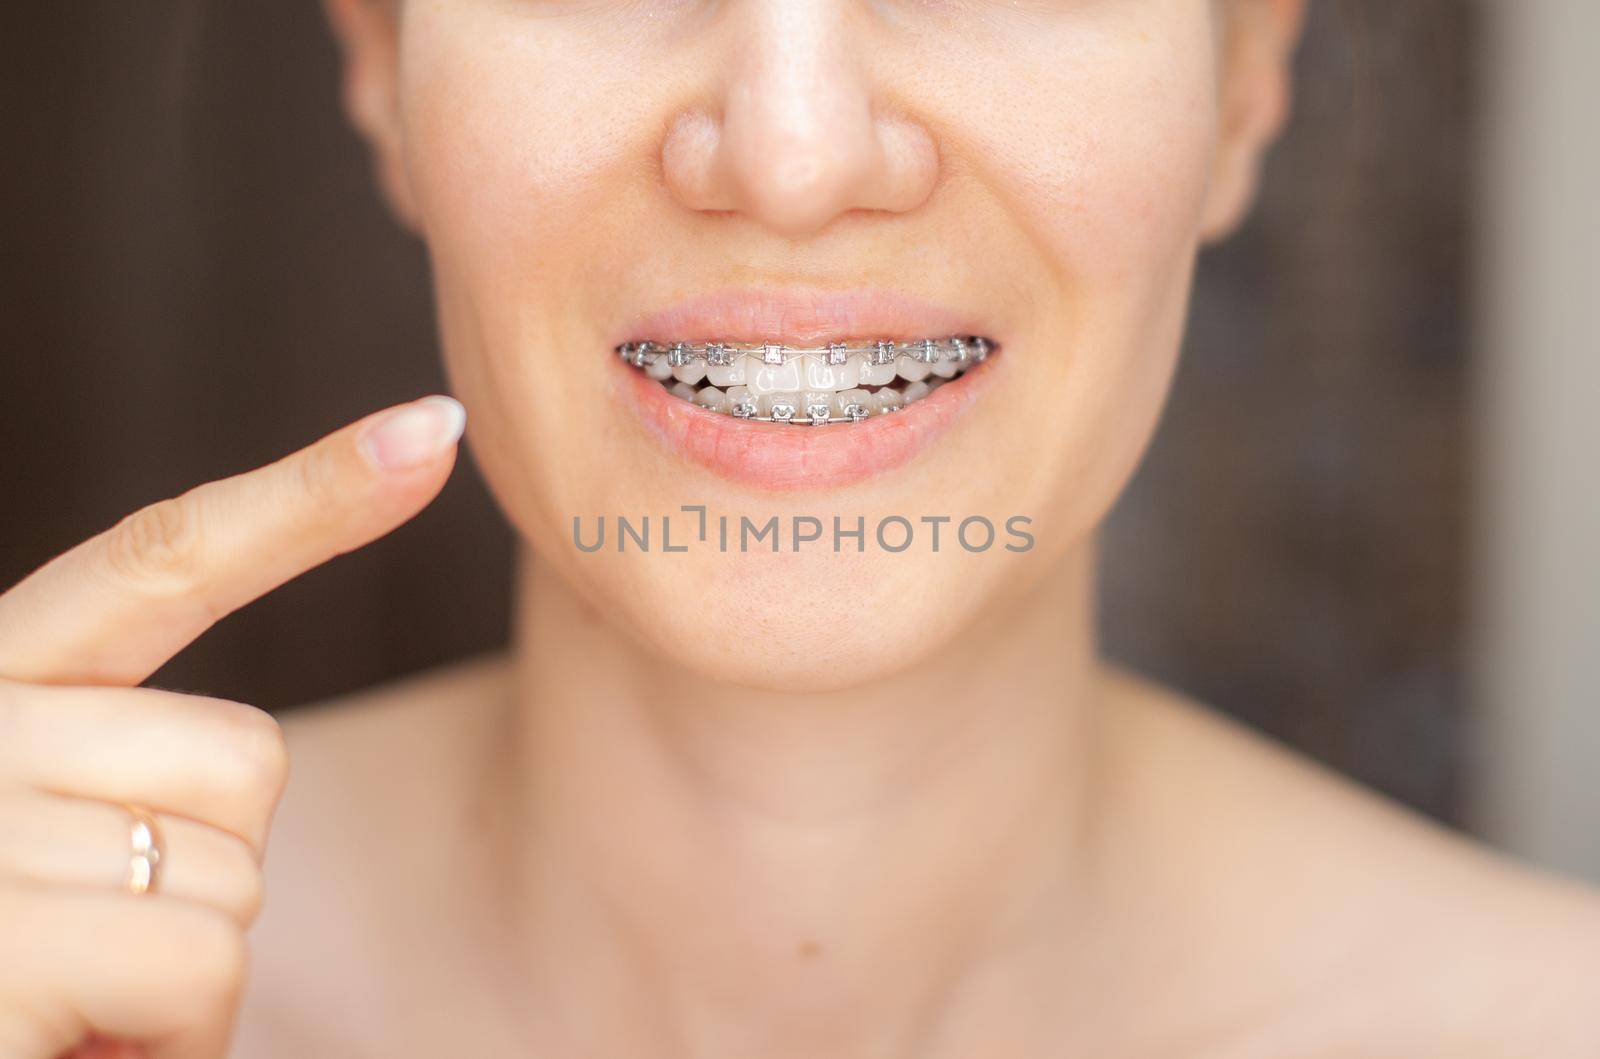 The girl points her finger at the even and white teeth with braces. by AnatoliiFoto